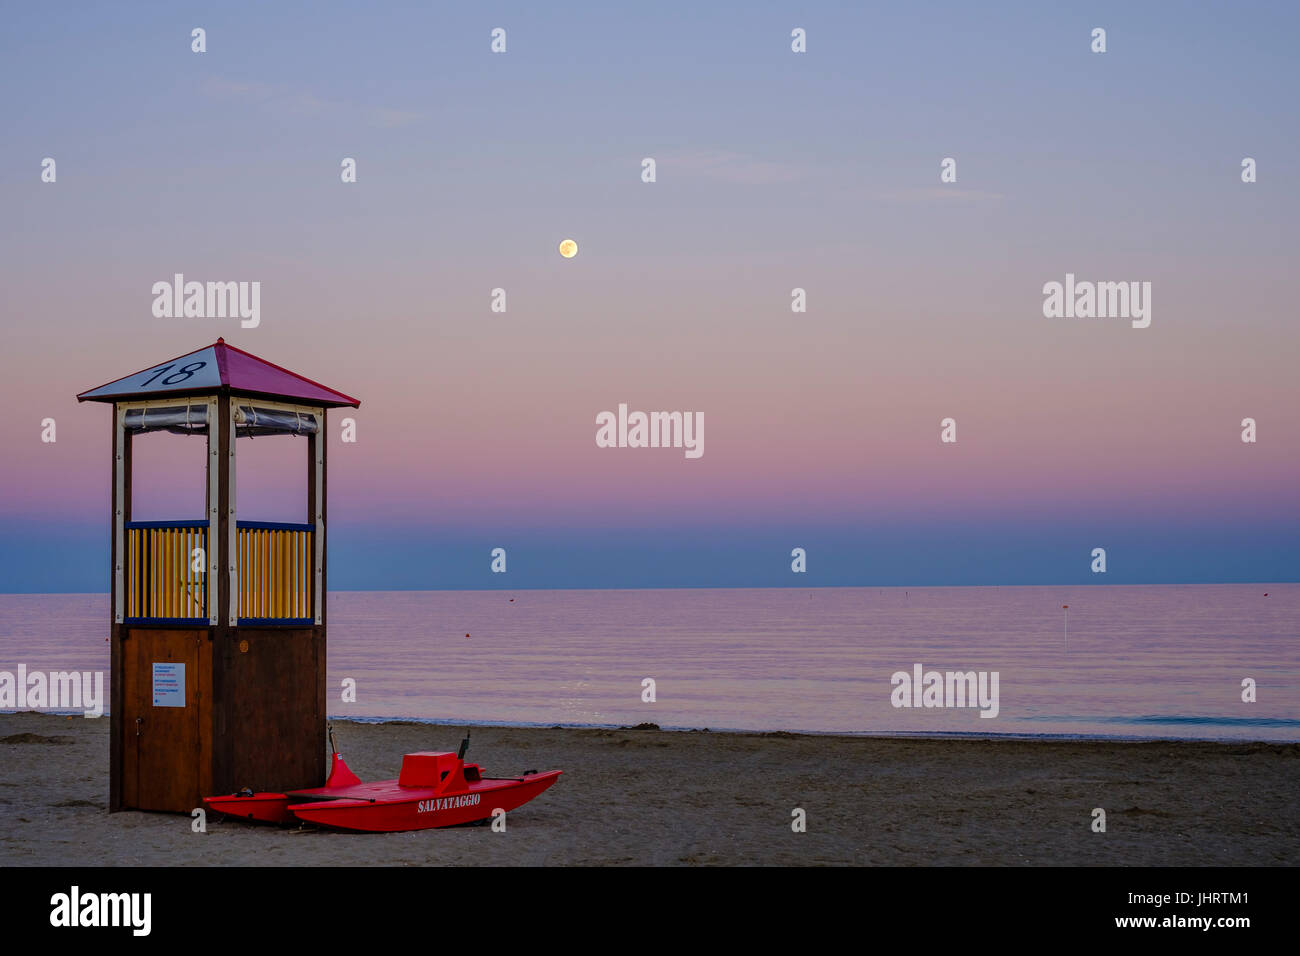 Rescue tower and rescue boat on the beach, evening mood, Adriatic Sea, Italy Stock Photo